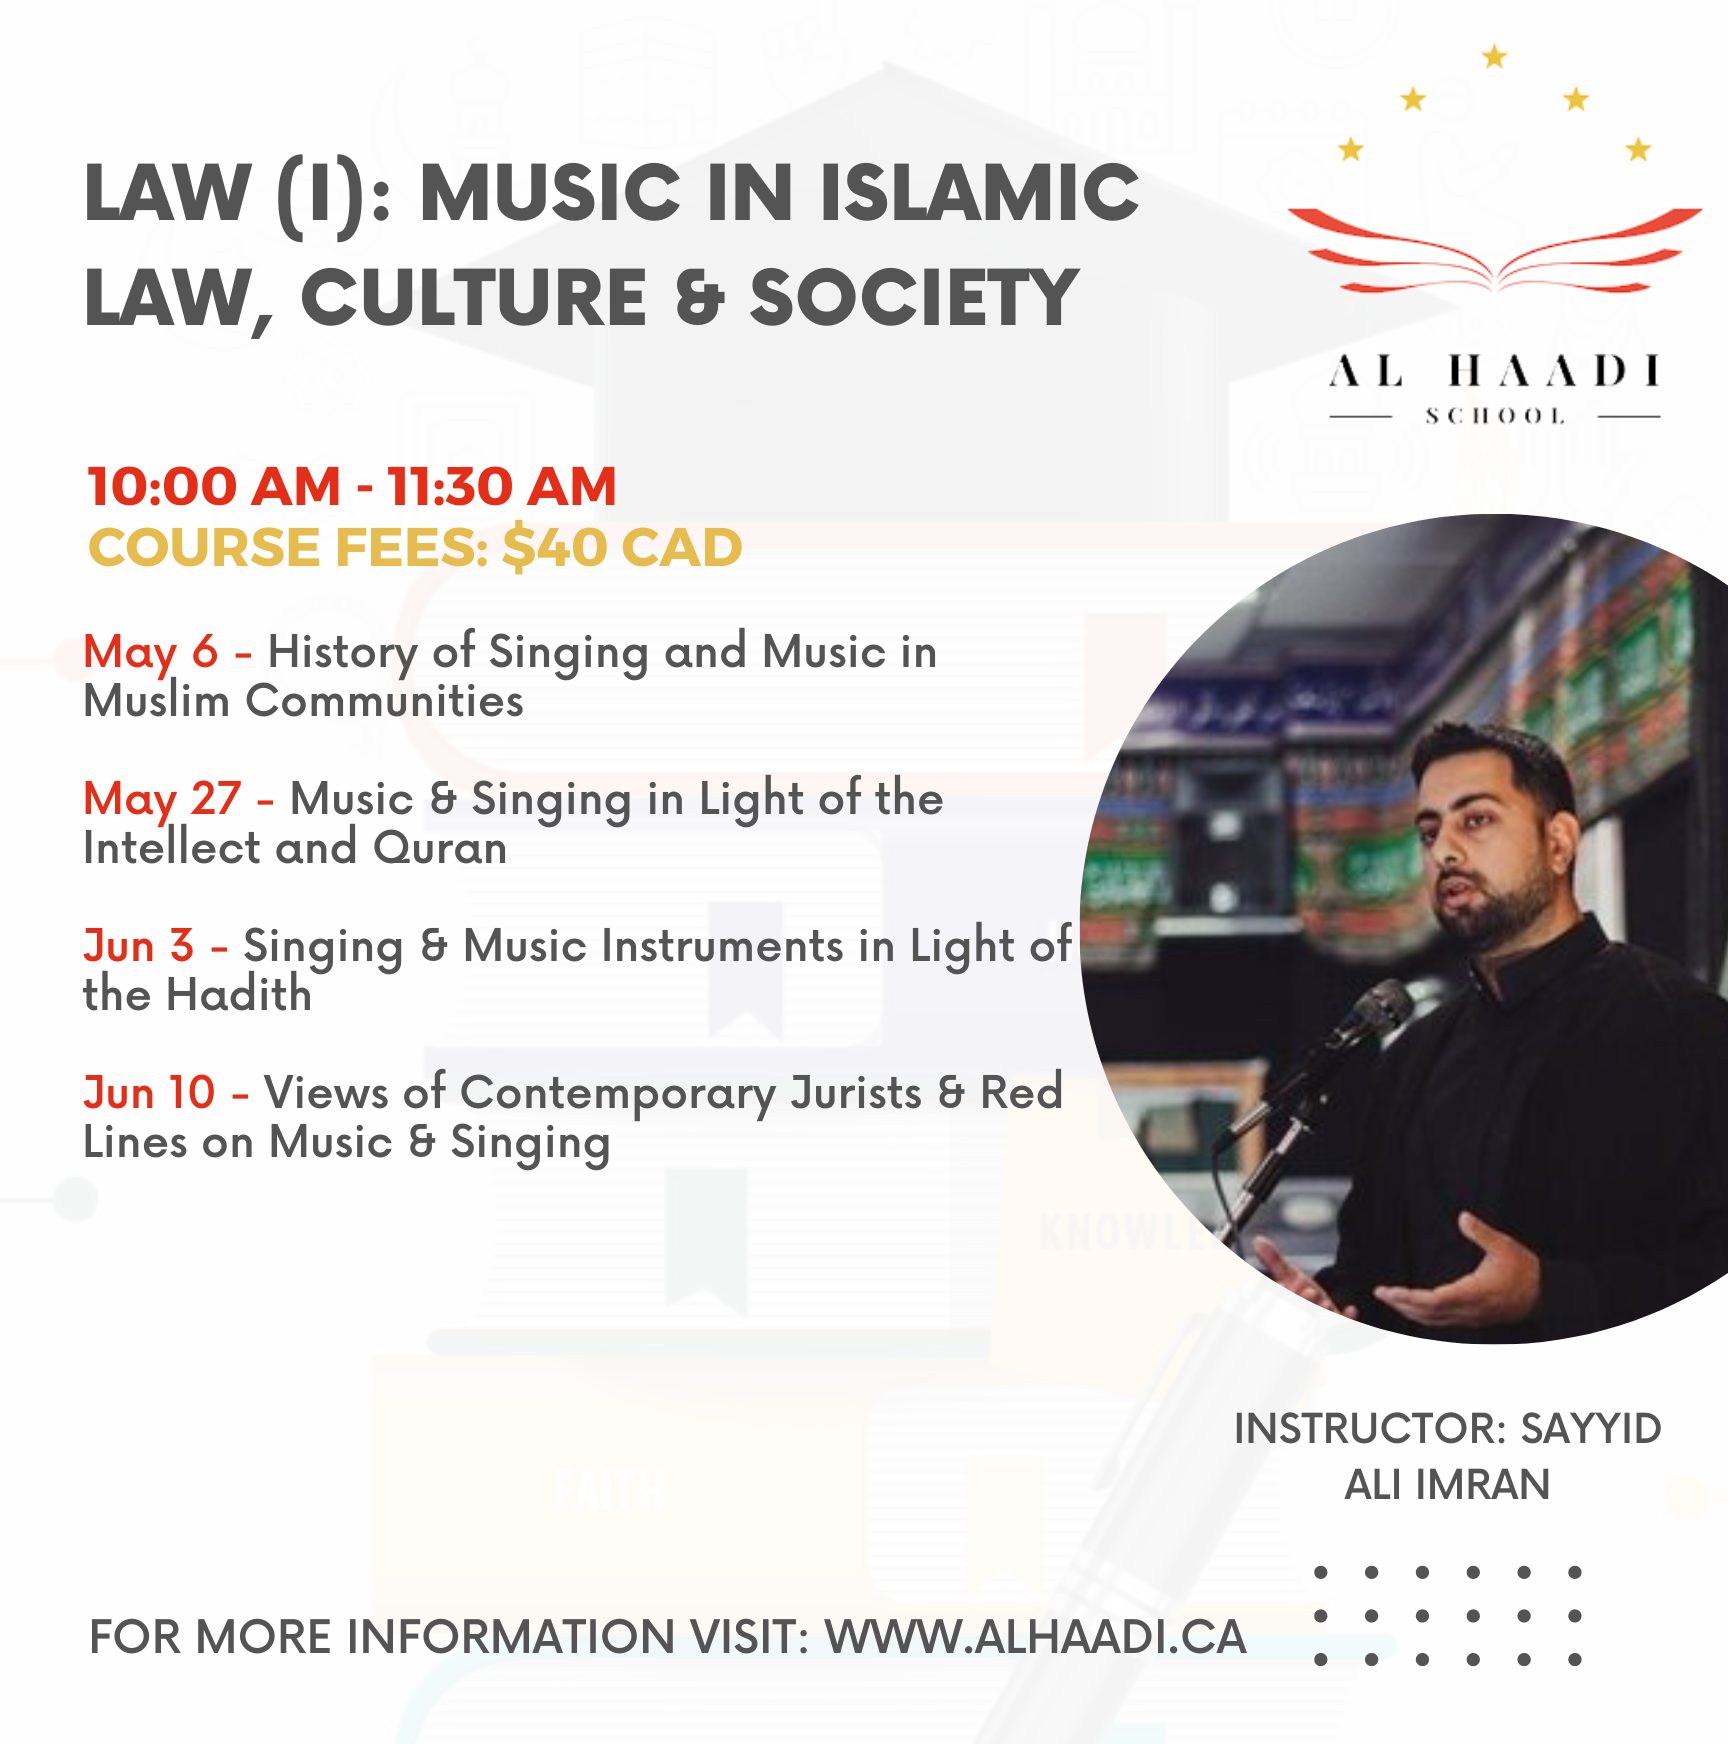 LAW (I): Music in Islamic Law, Culture and Society